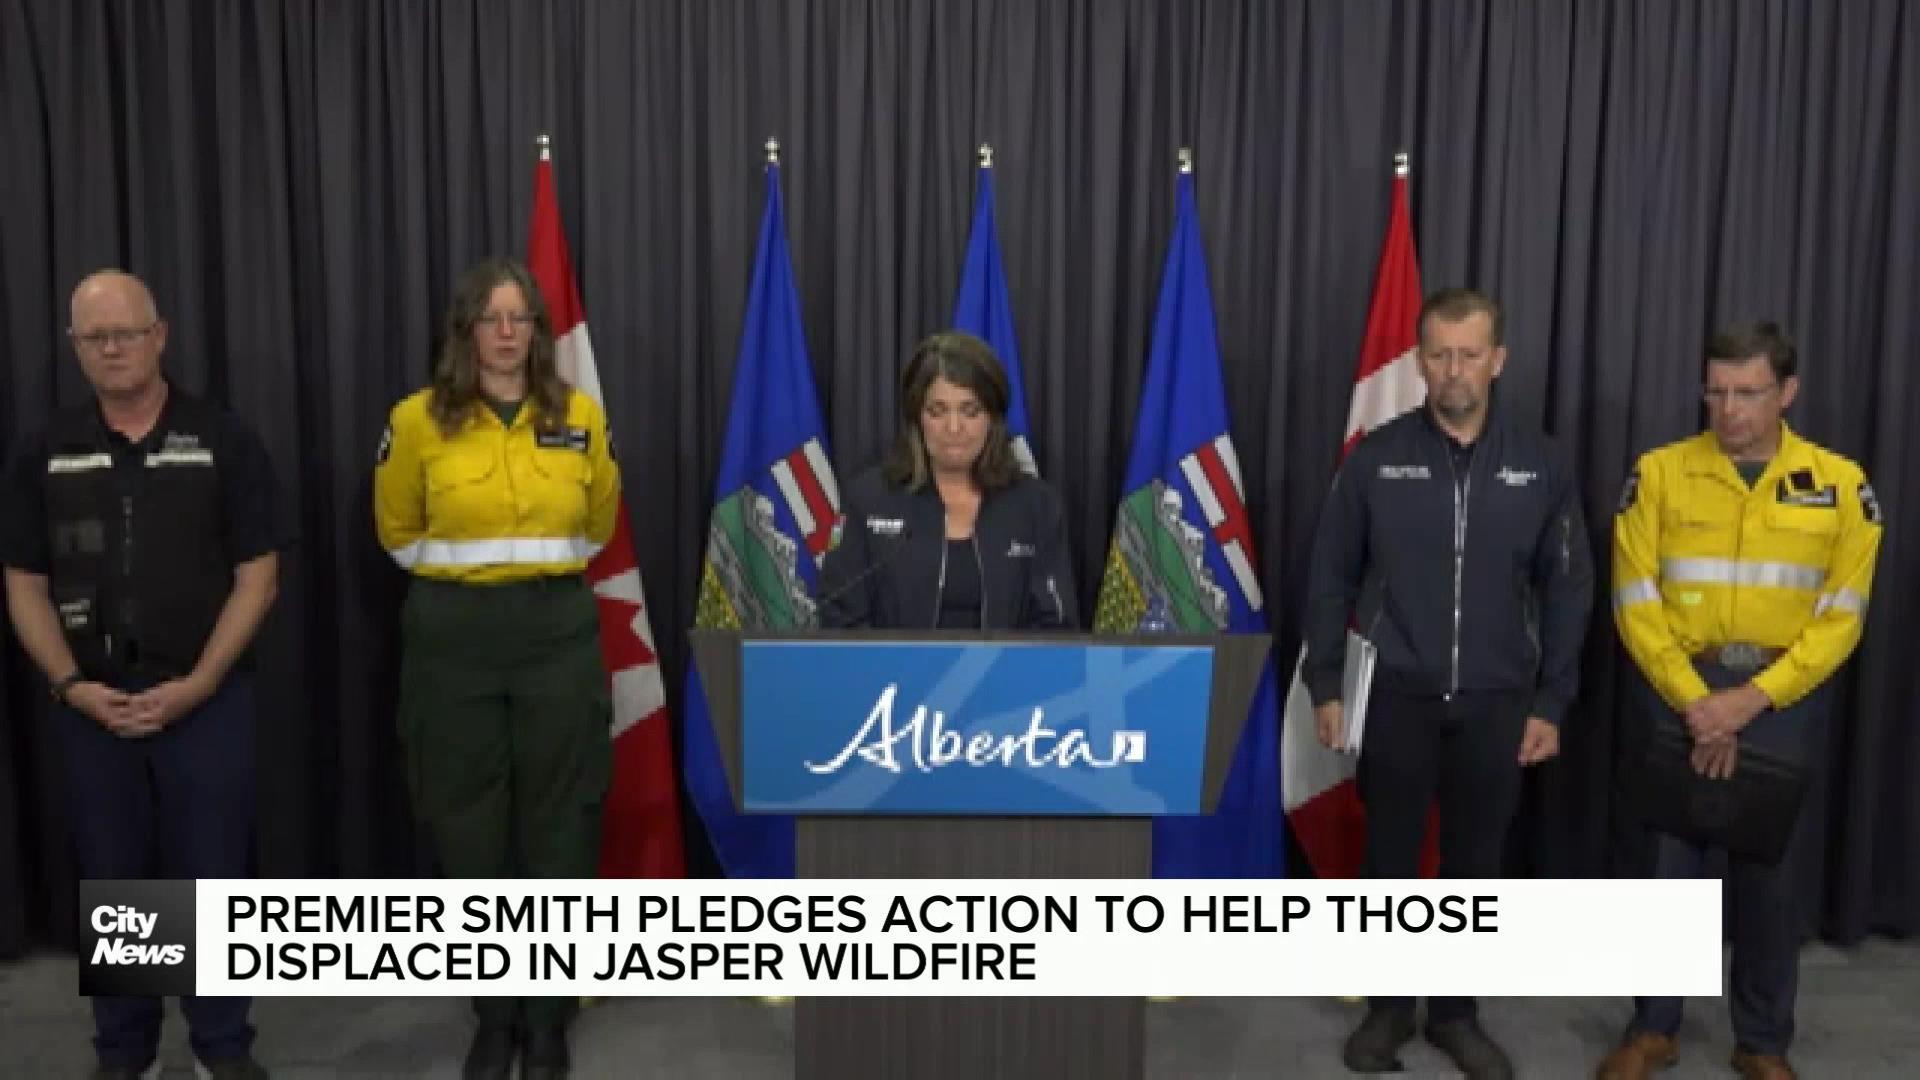 Premier Smith pledges to help those displaces by Jasper wildfire